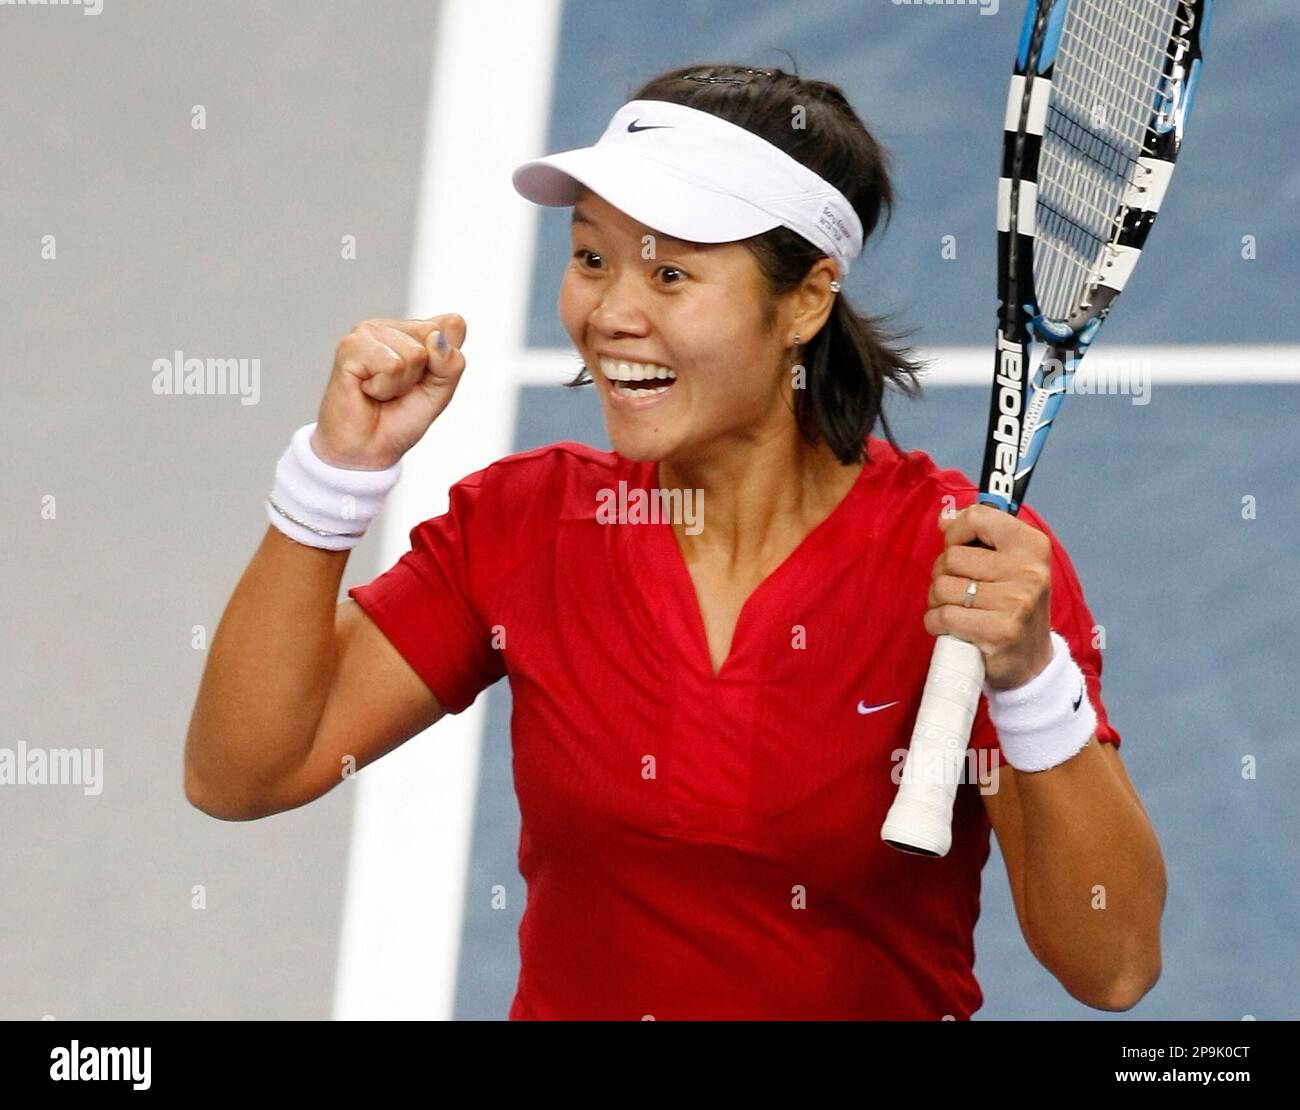 Na Li from China reacts after defeating Serena Williams from the USA during  their 2nd round match at the Porsche Grand Prix tennis tournament in  Stuttgart, Germany, Wednesday, Oct. 1, 2008. Serena